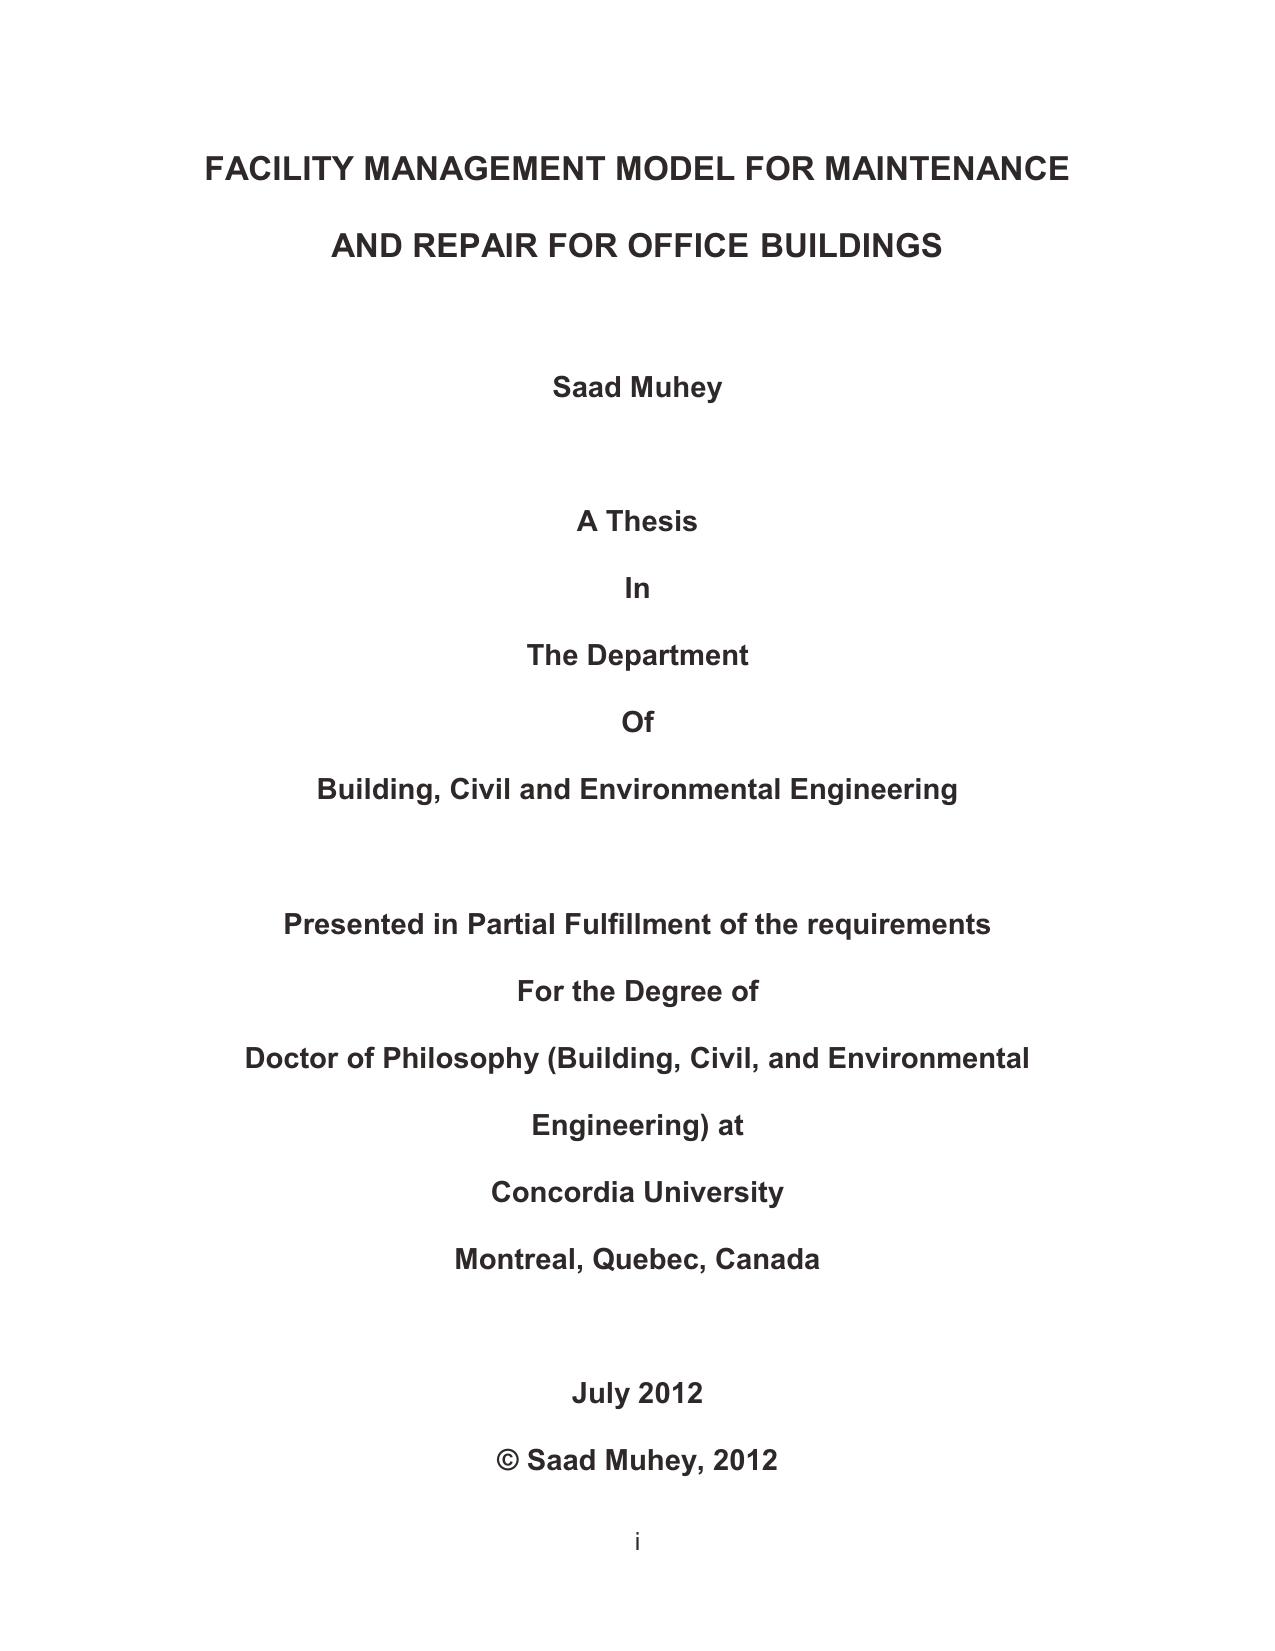 FACILITY MANAGEMENT MODEL FOR MAINTENANCE AND REPAIR FOR OFFICE BUILDINGS